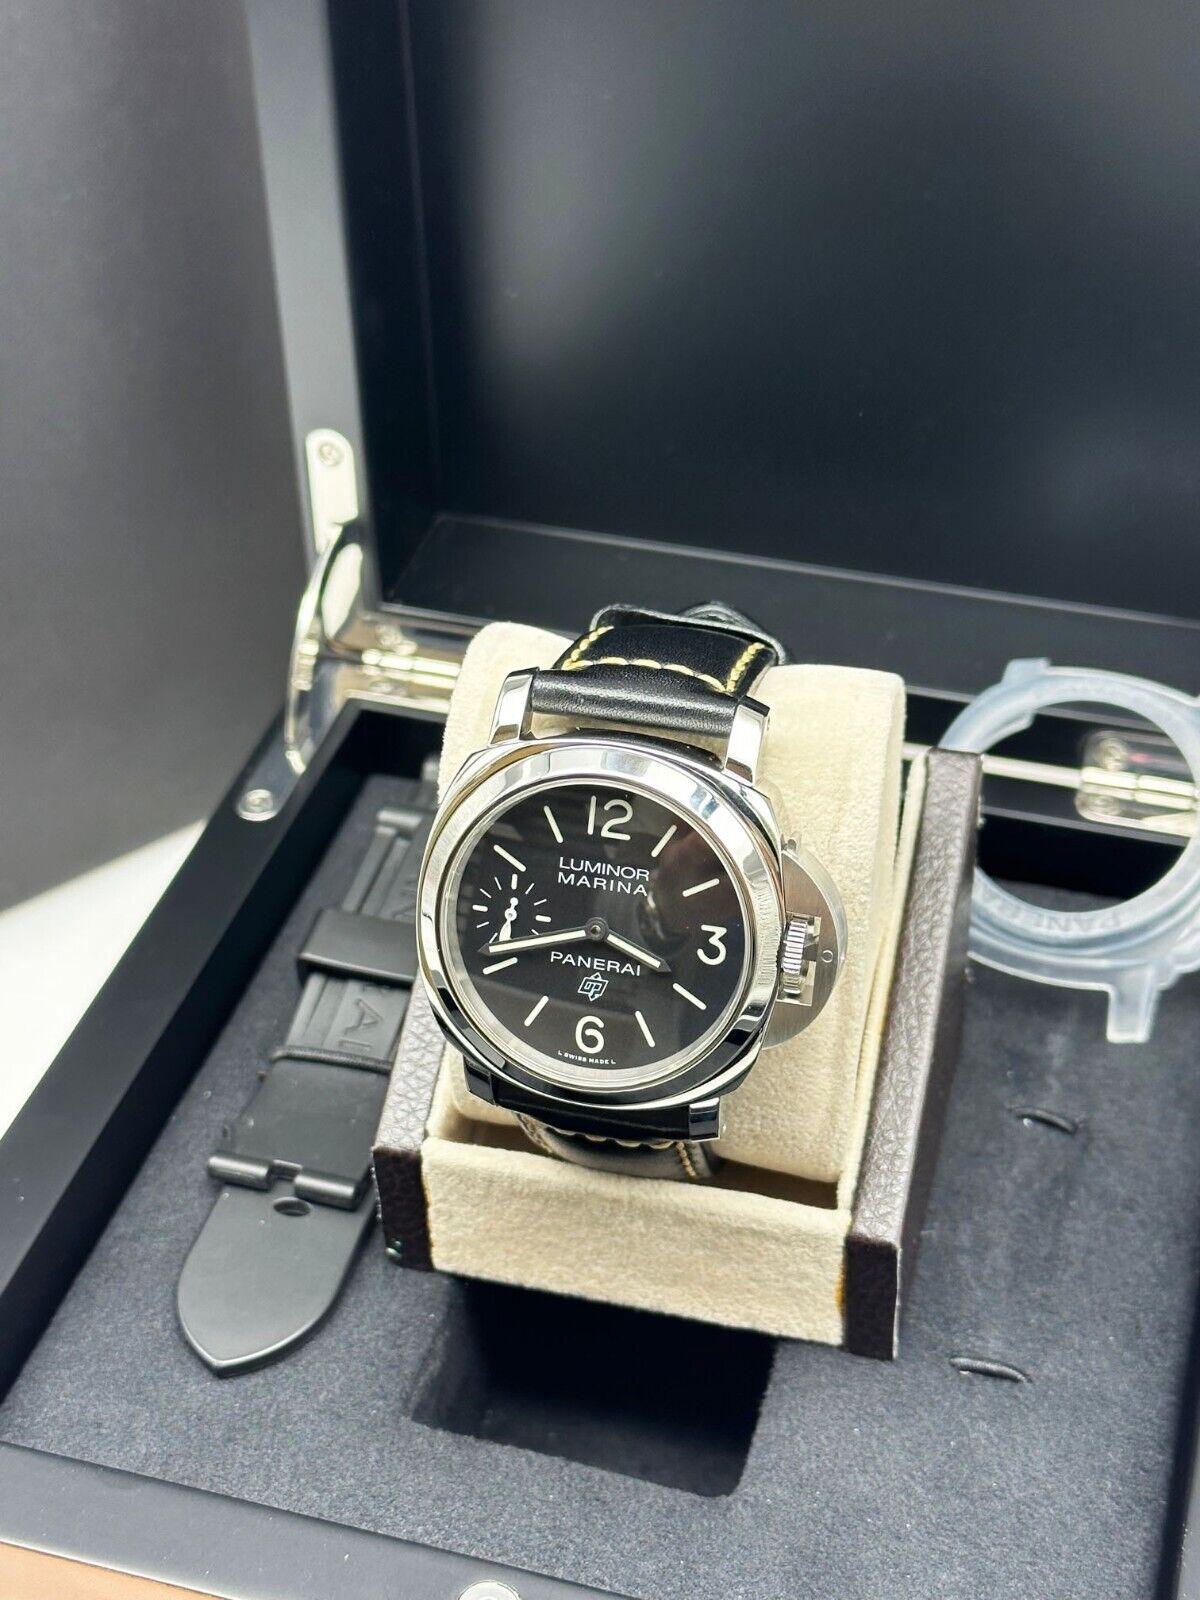 2019 Panerai PAM00776 PAM 776 Luminor Marina Logo Stainless Steel In Excellent Condition For Sale In San Diego, CA